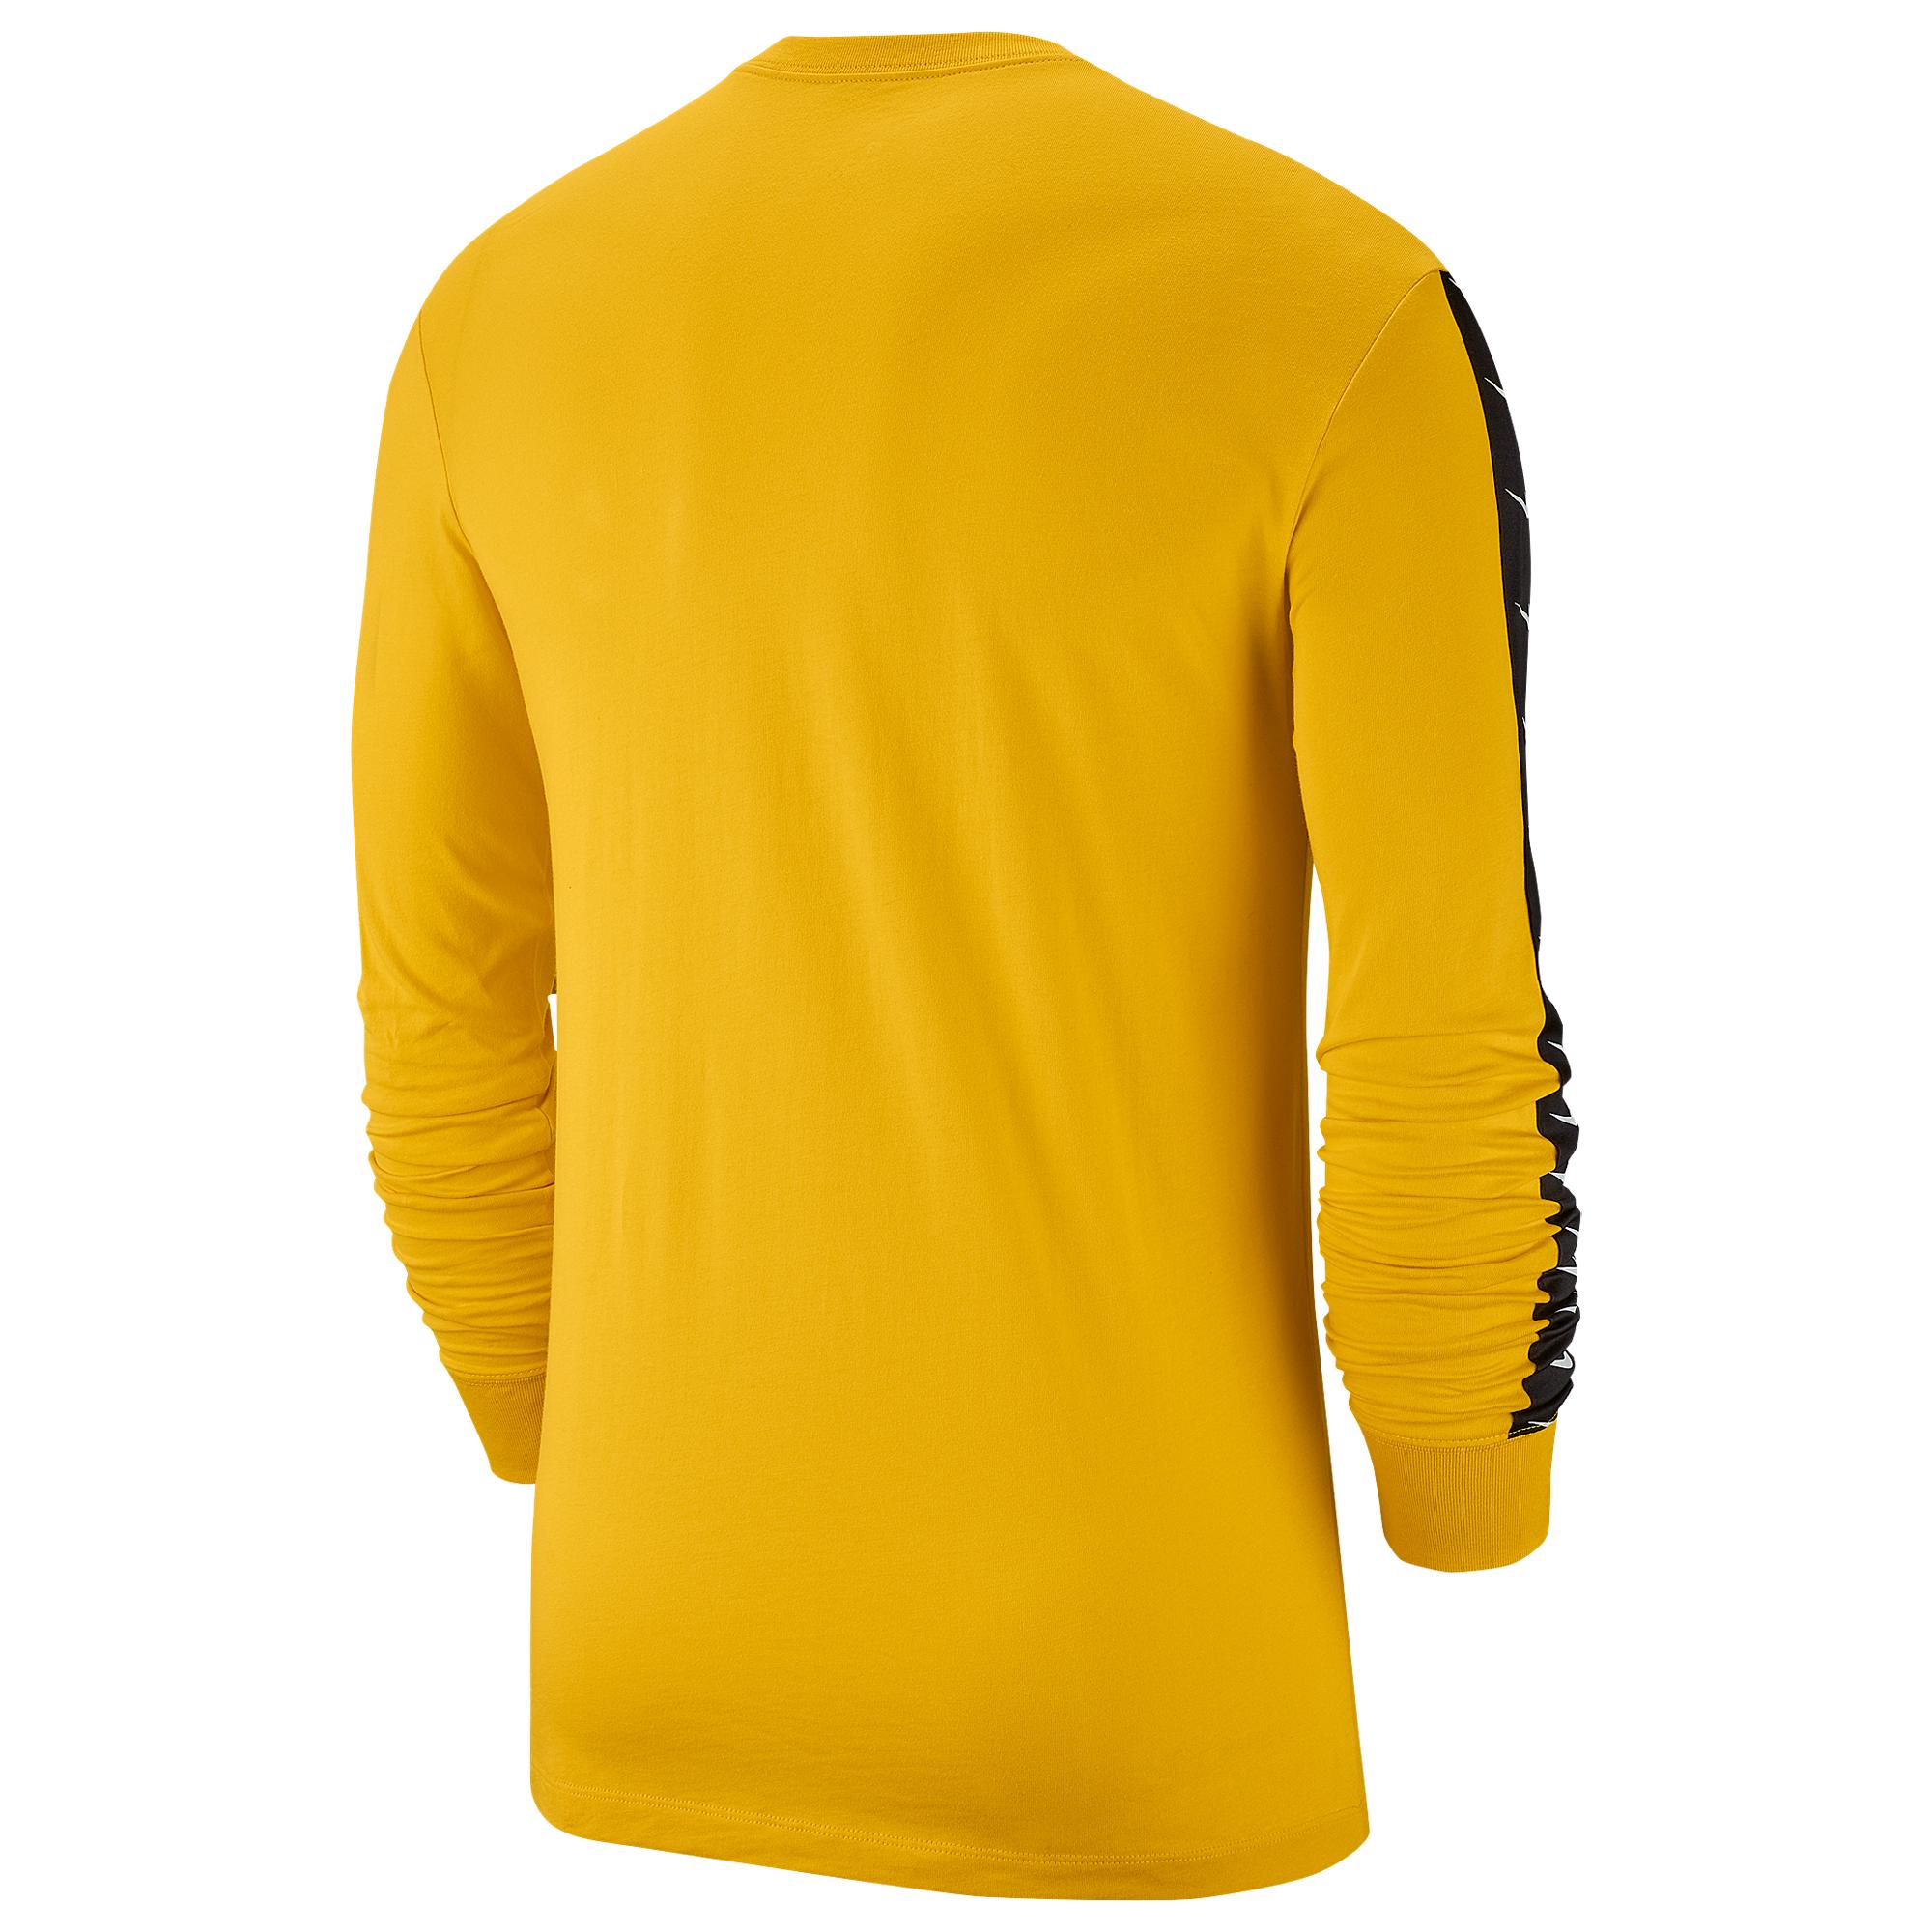 Nike Cotton Swoosh Long Sleeve T-shirt in Yellow for Men - Lyst